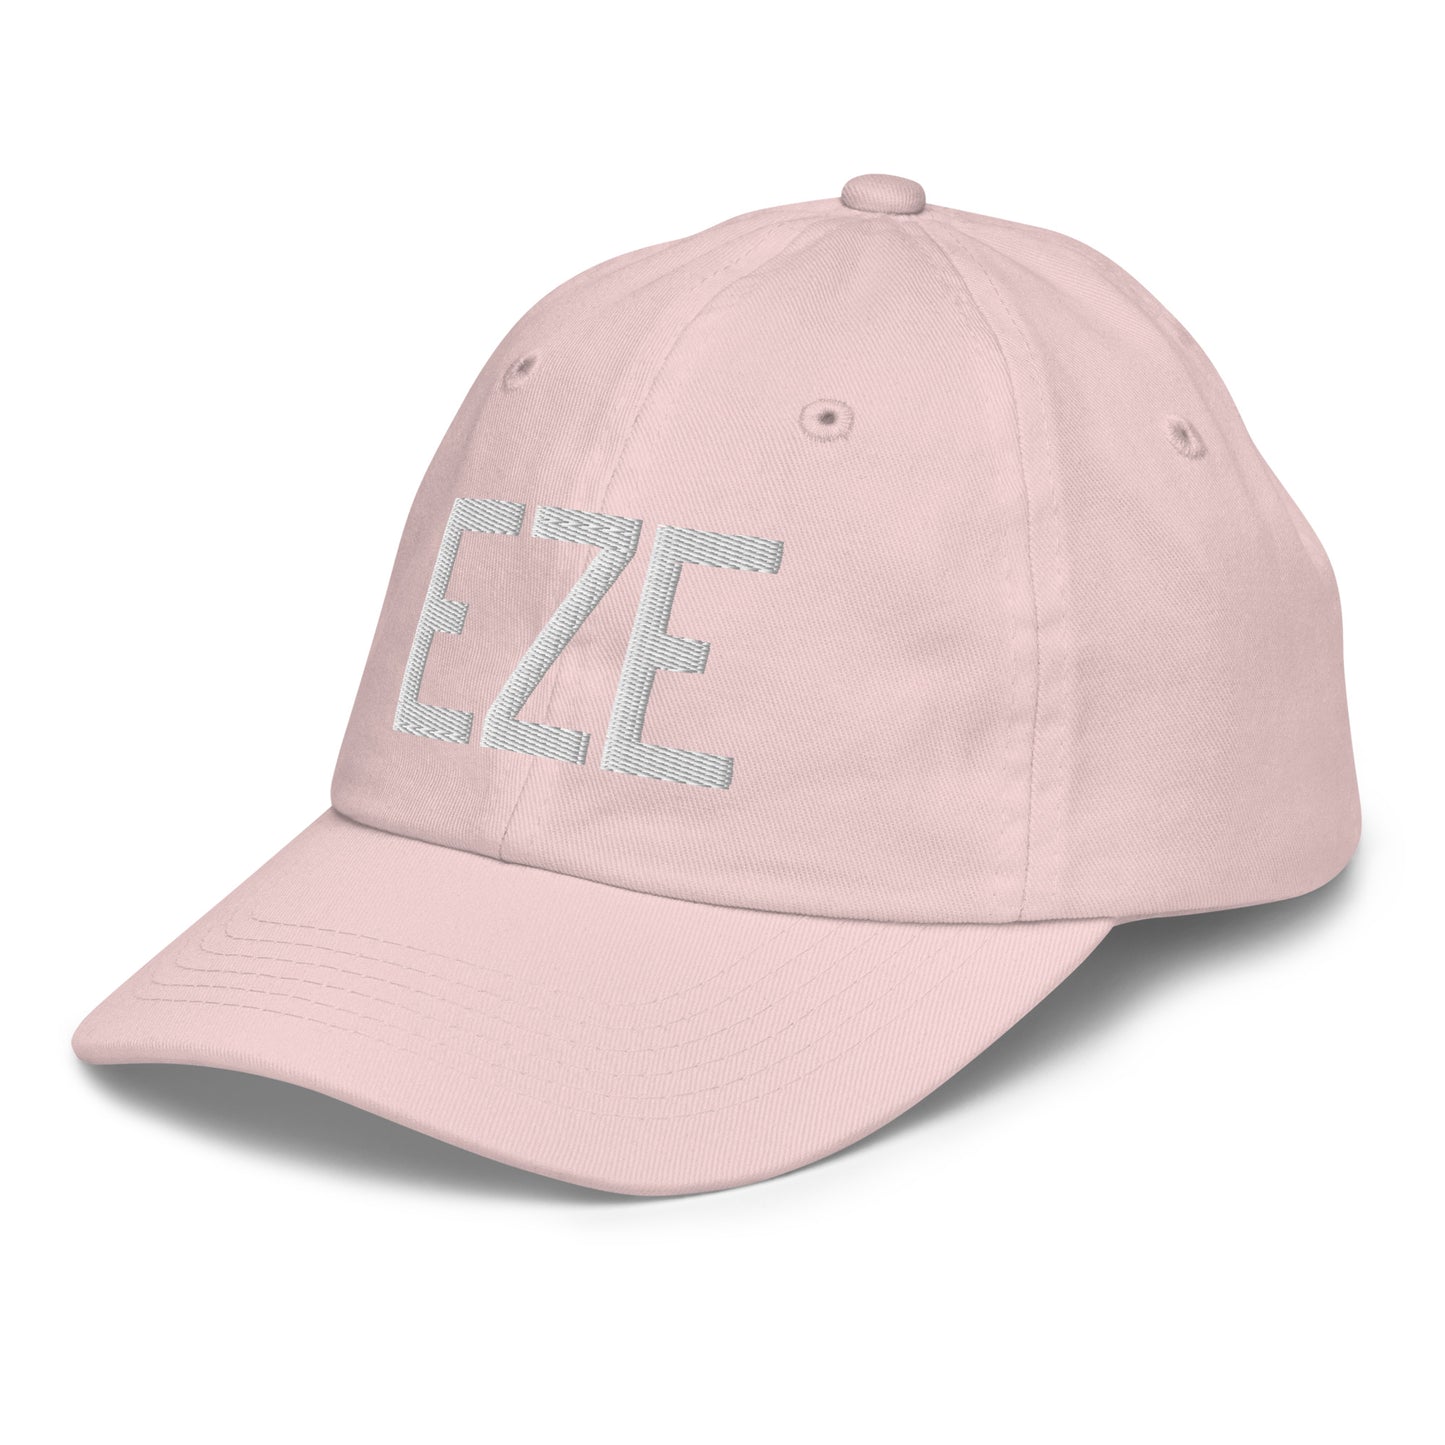 Airport Code Kid's Baseball Cap - White • EZE Buenos Aires • YHM Designs - Image 33